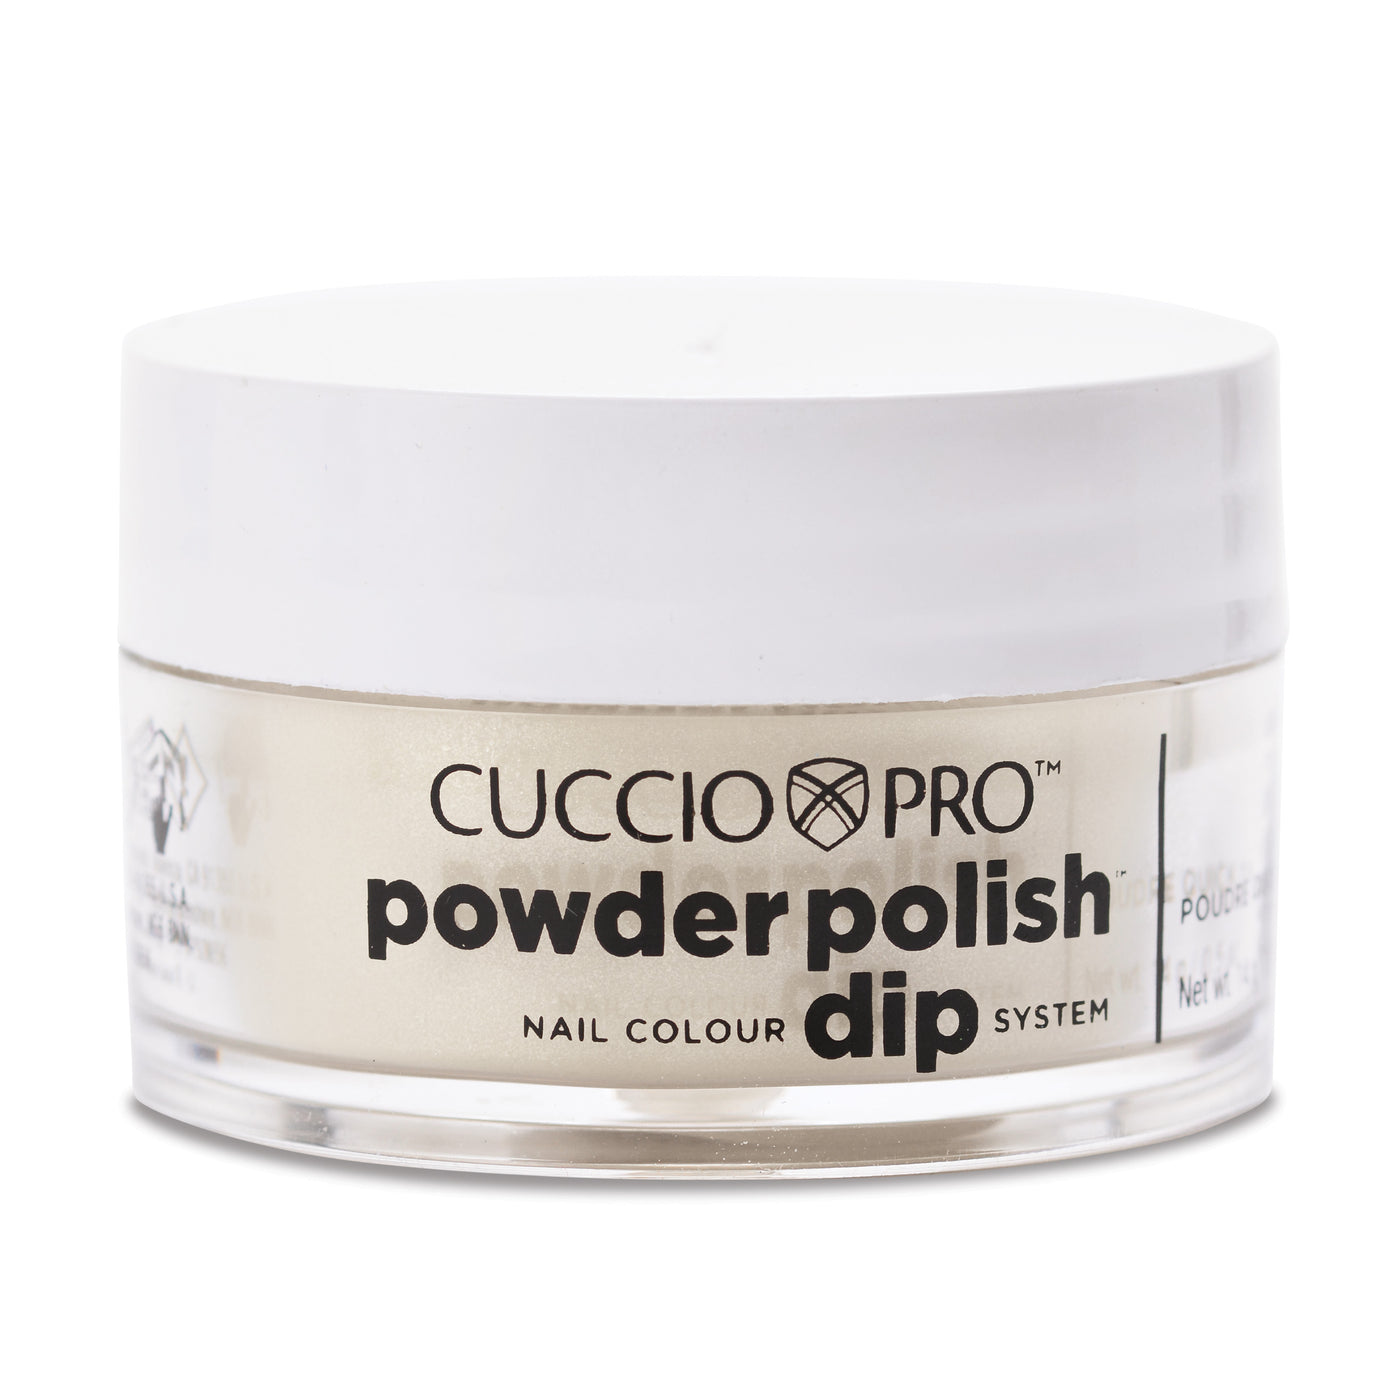 CP Dipping Powder14g - 5569-5 Gold Glitter W/ Large & Small